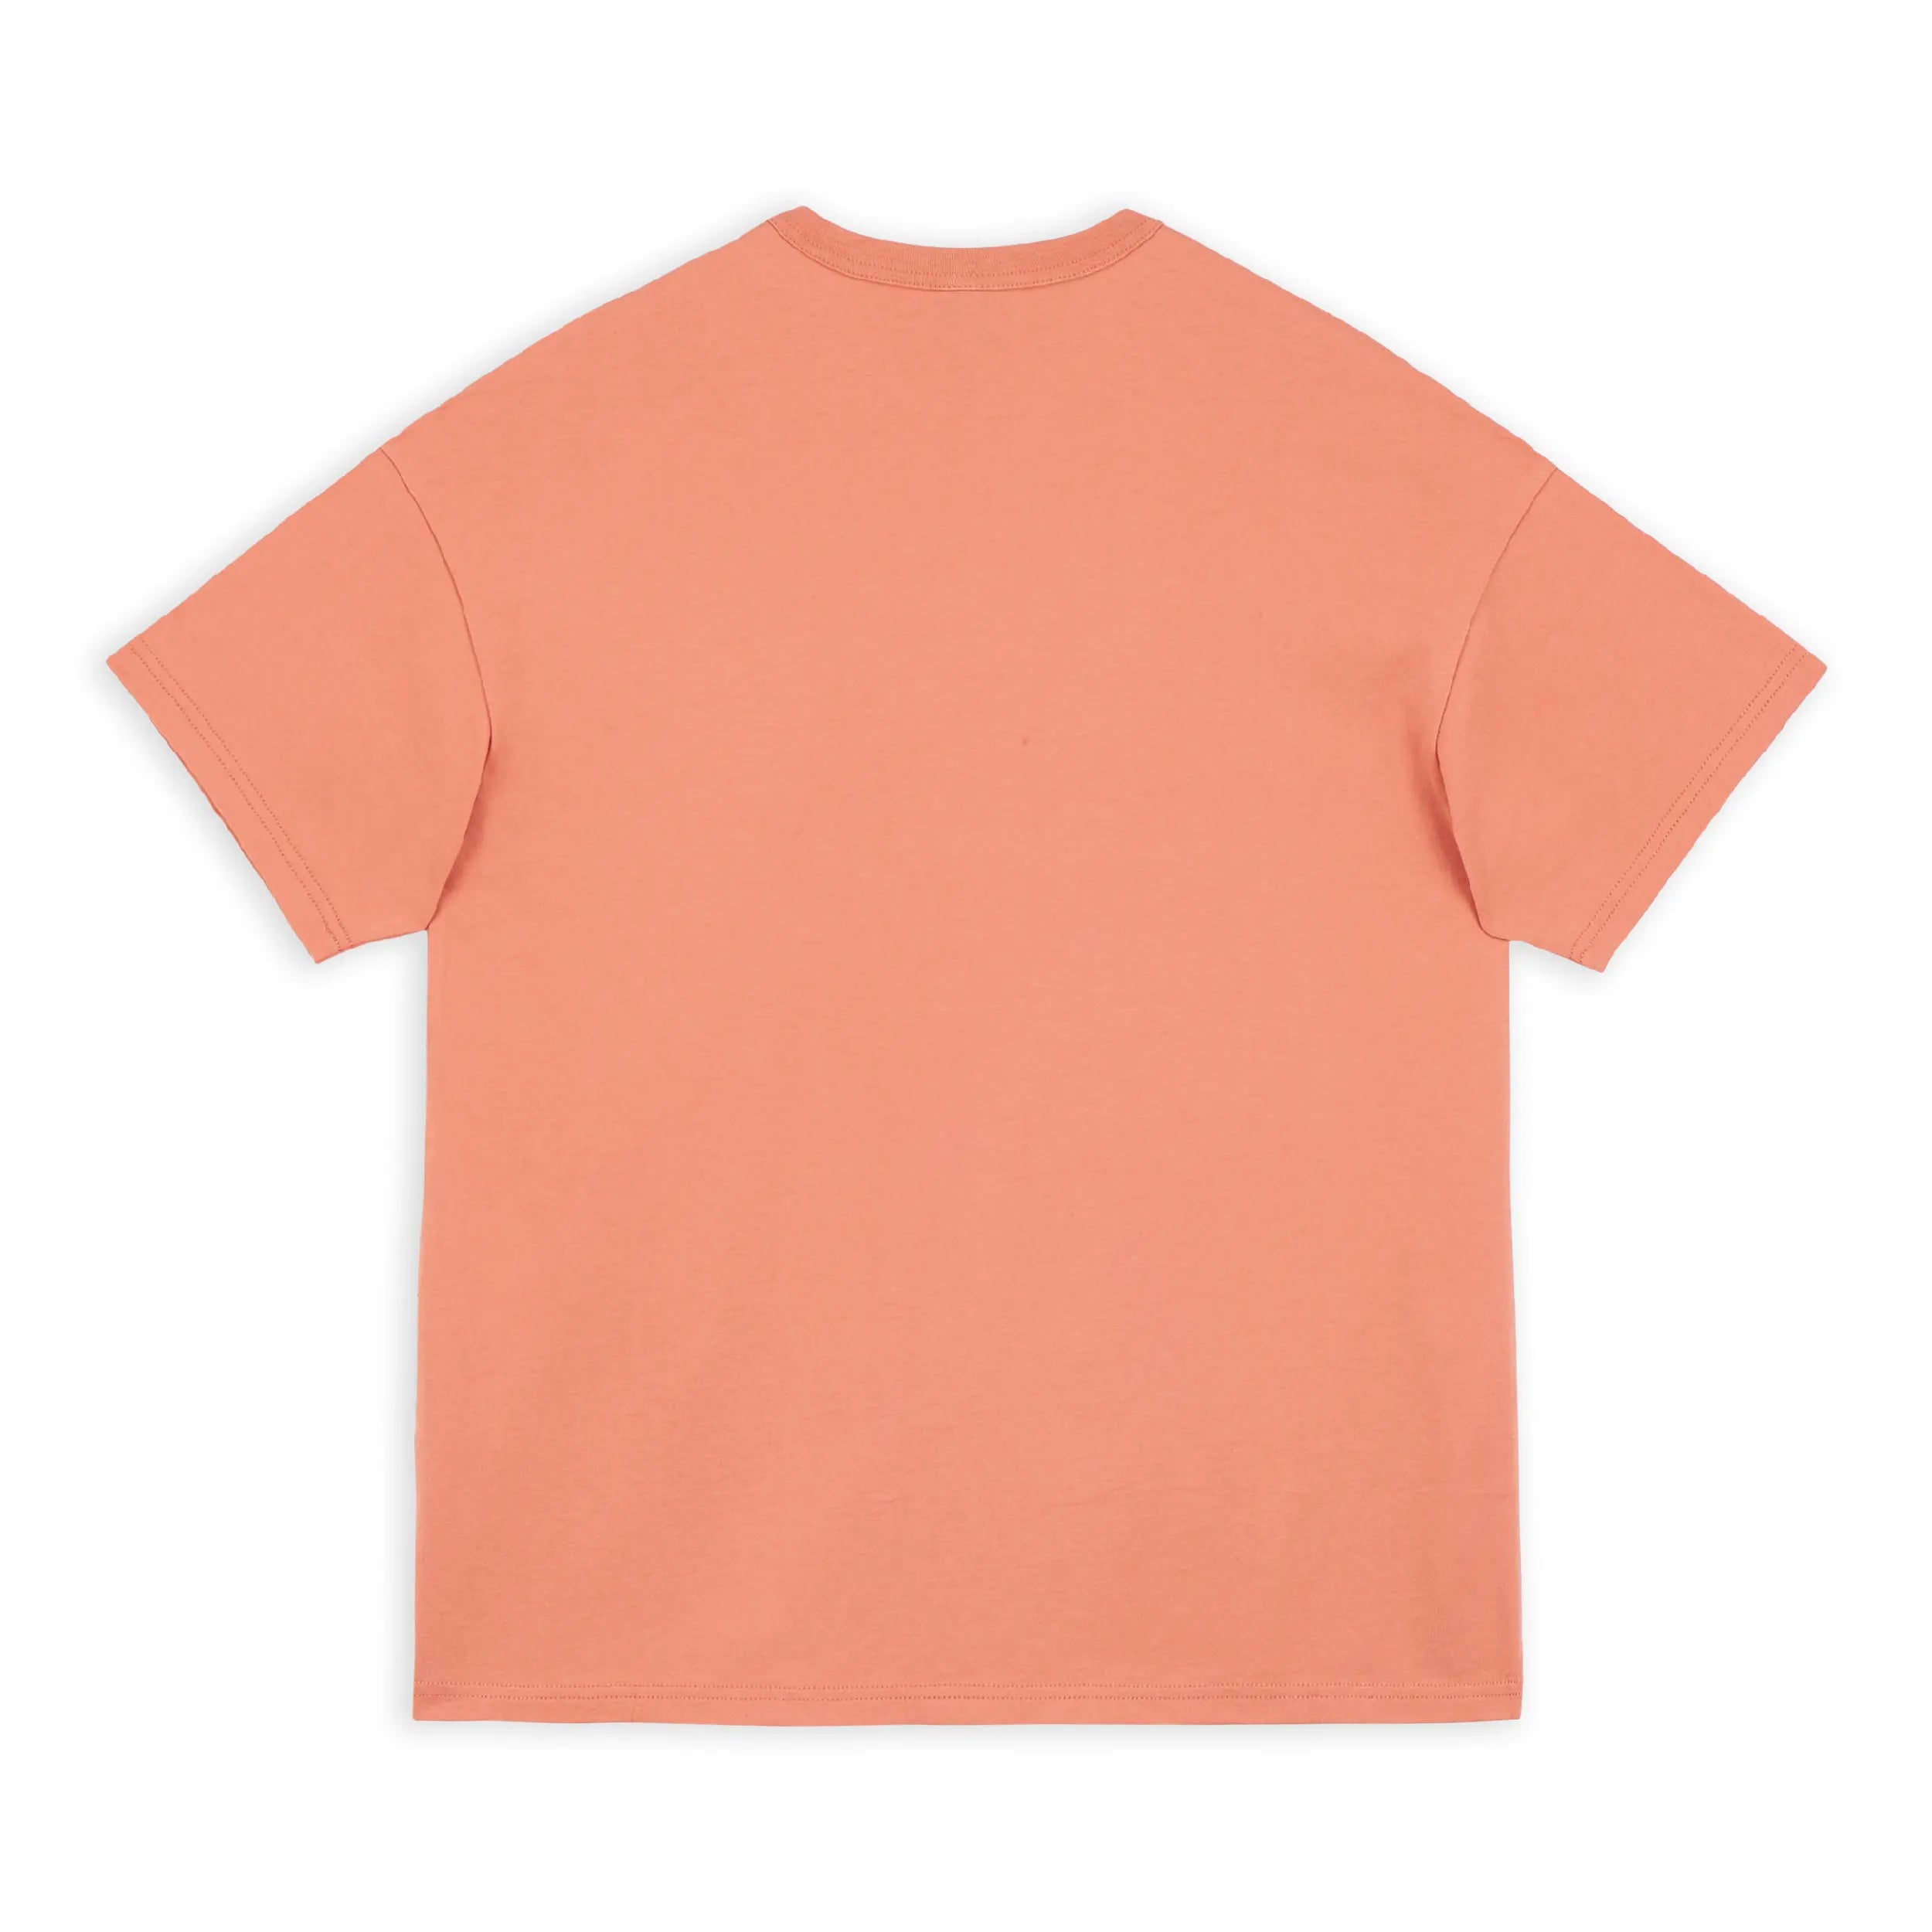 W's Outside by the River Oversized T-Shirt - Hooké